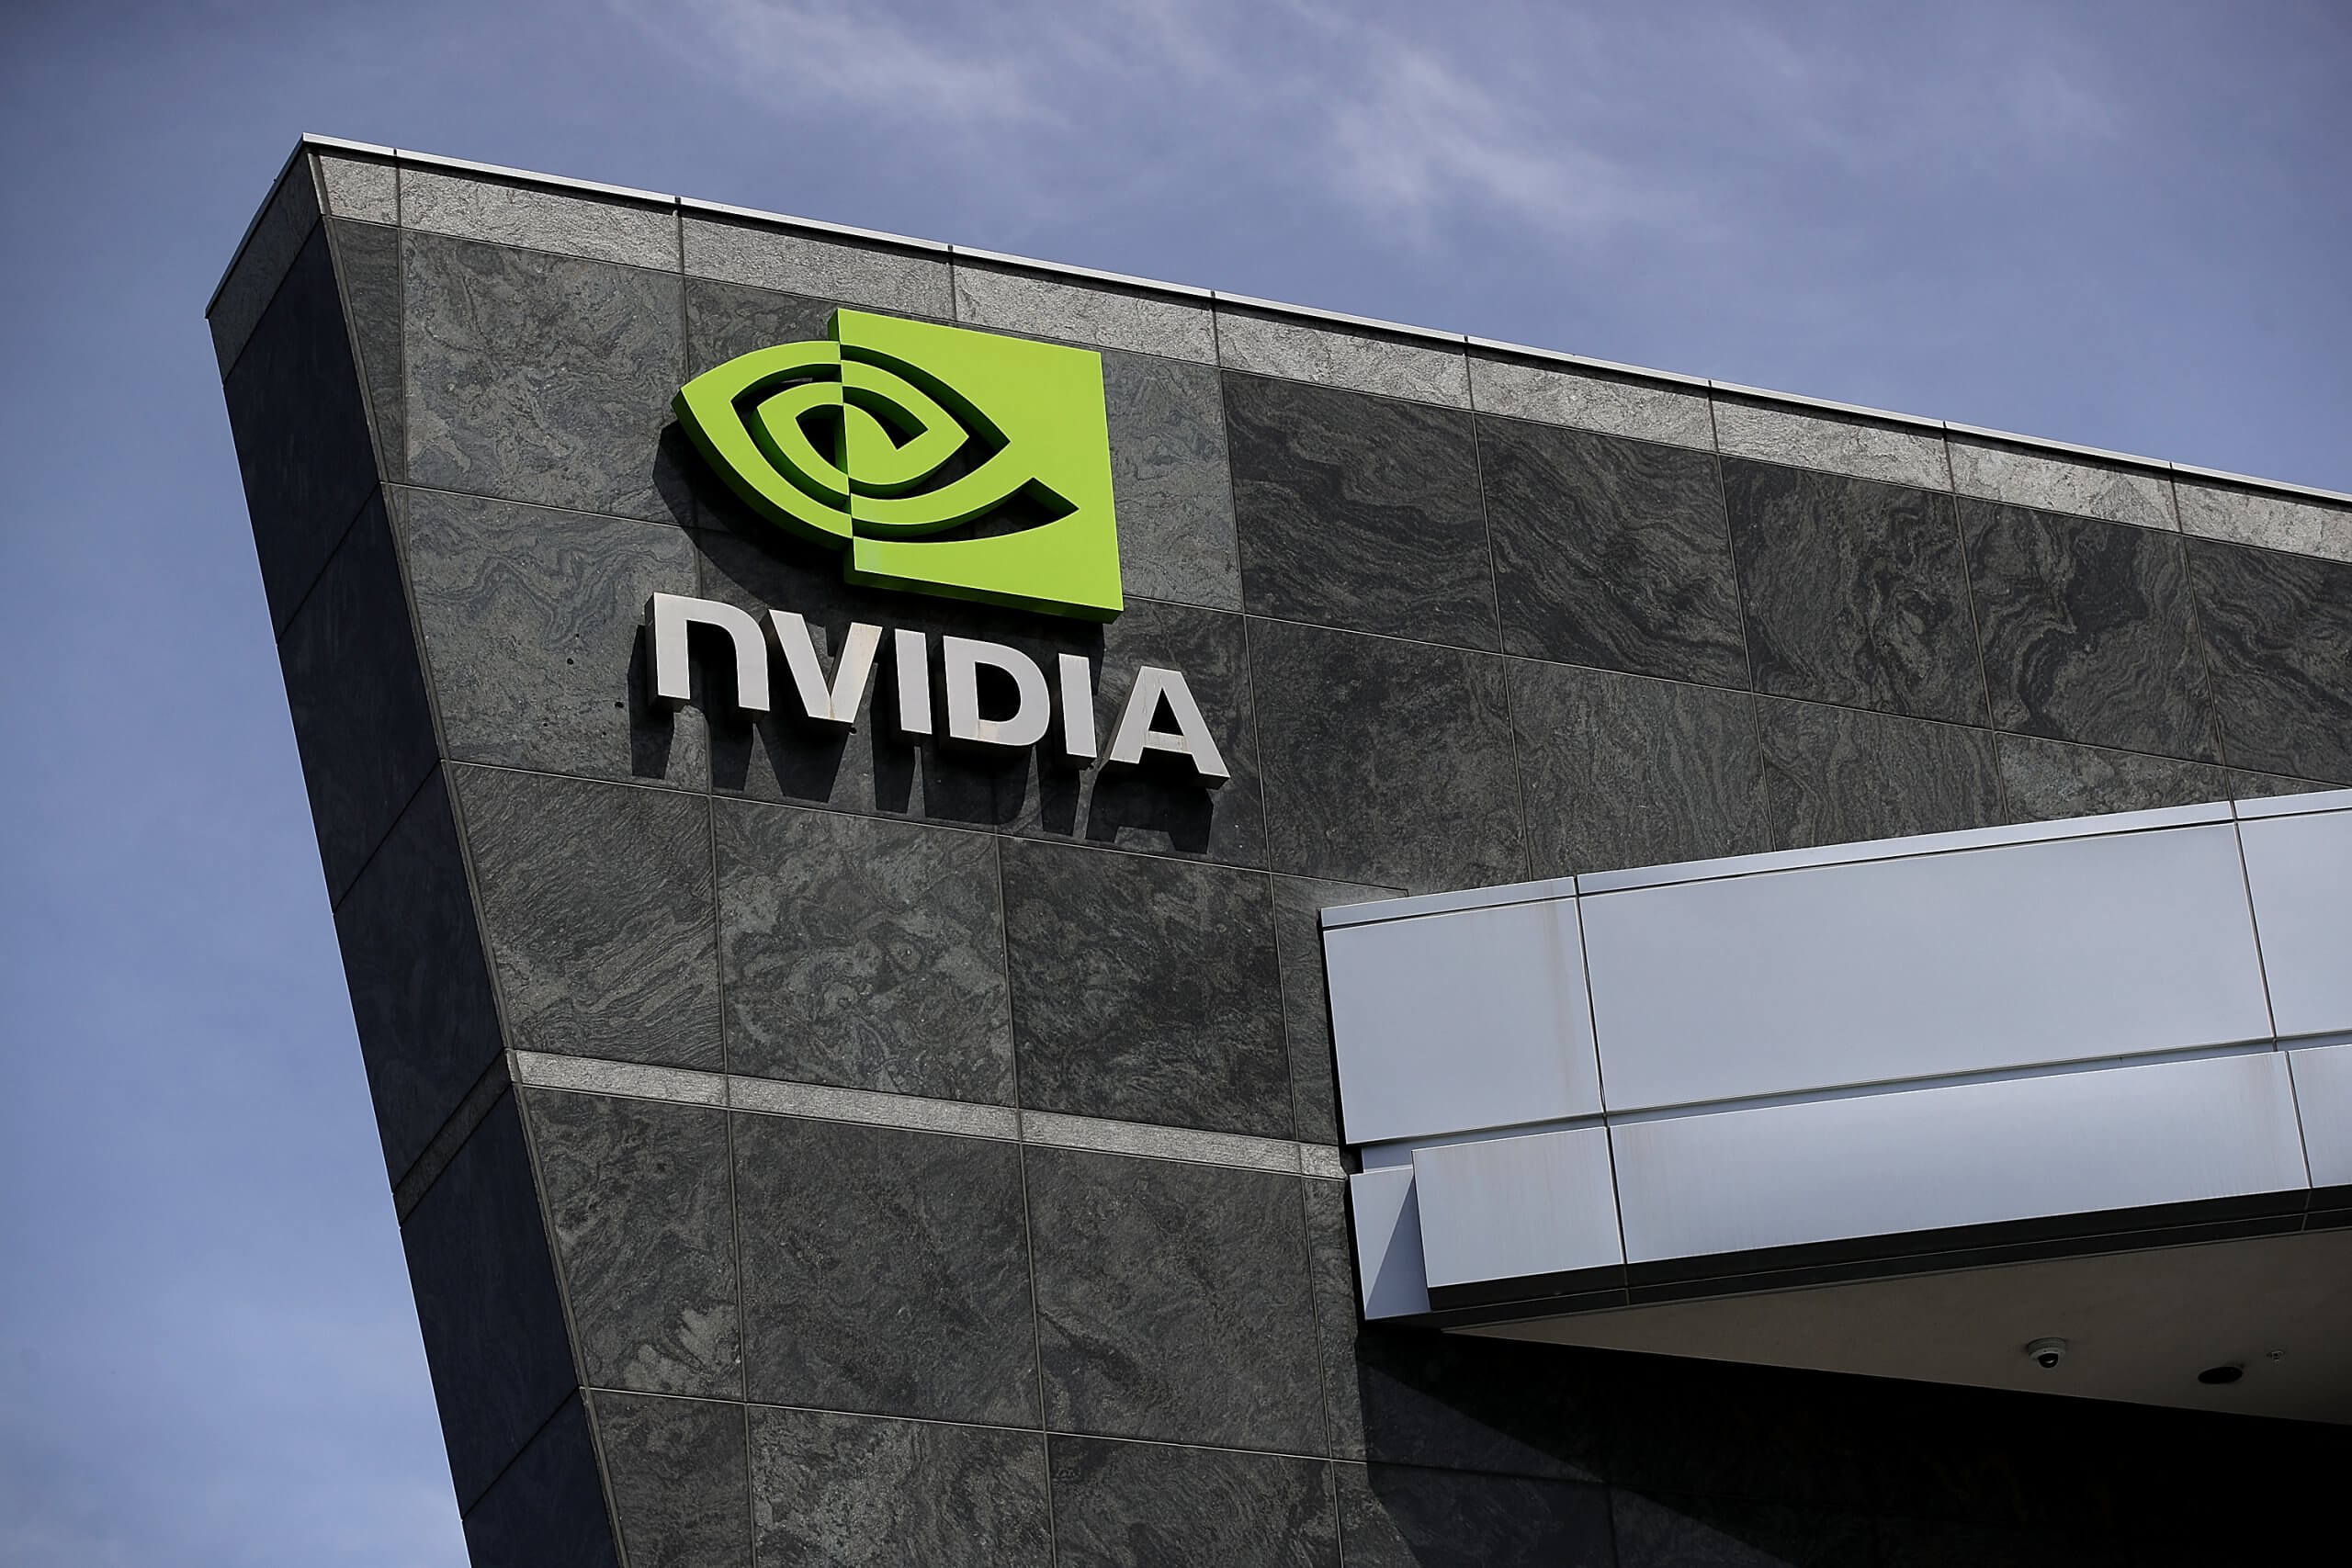 The California-based Nvidia is one of the world's largest and most valuable computing companies, while Arm creates and licenses microprocessor designs and architectures